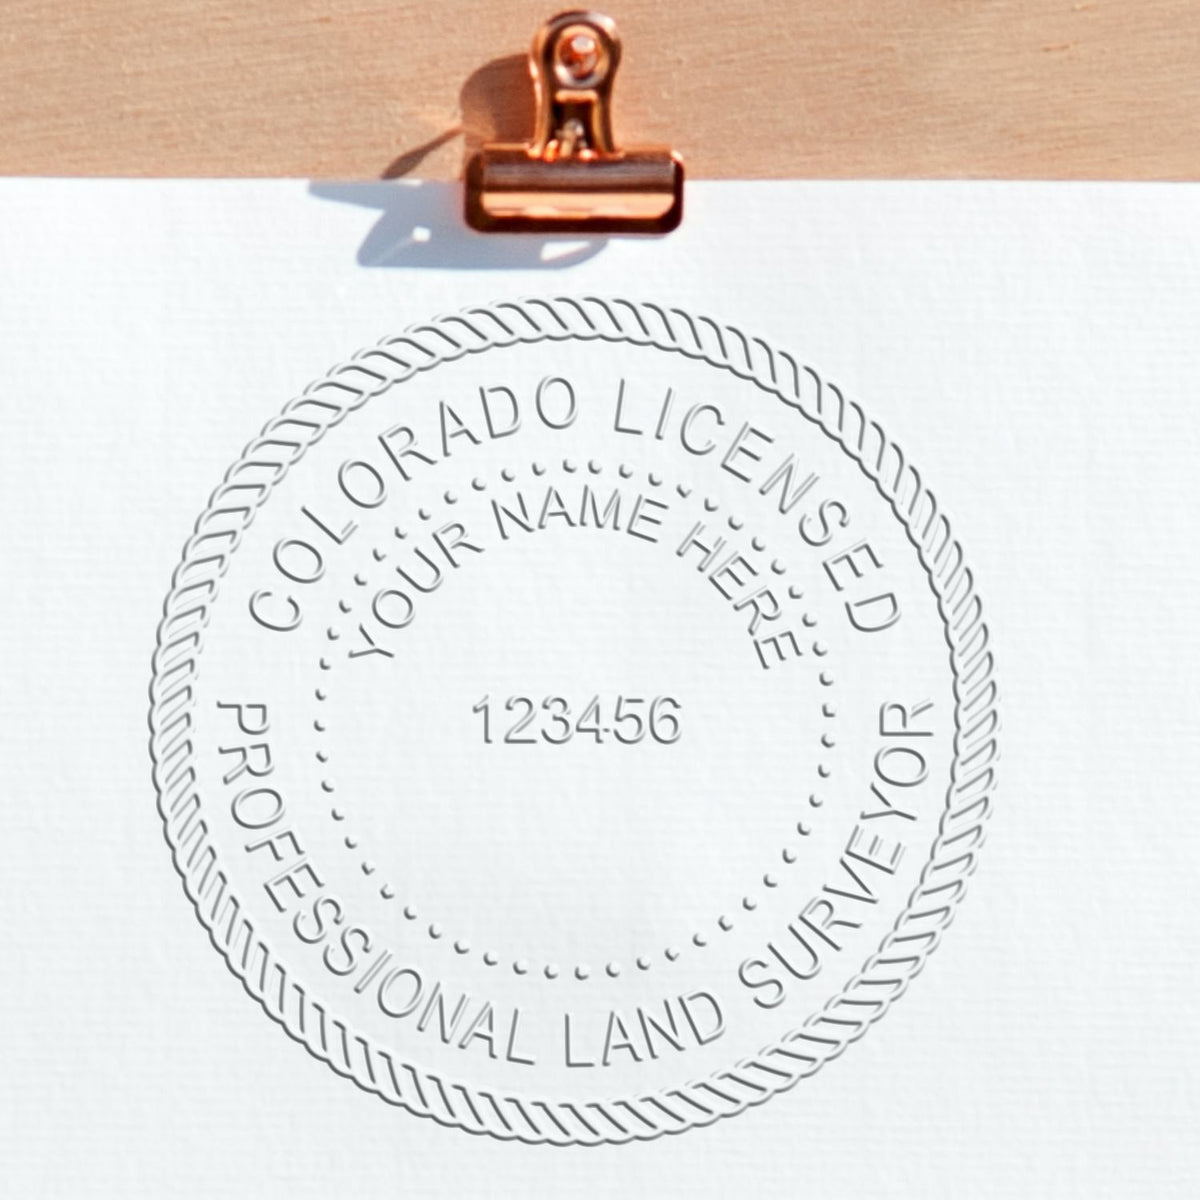 A lifestyle photo showing a stamped image of the Handheld Colorado Land Surveyor Seal on a piece of paper